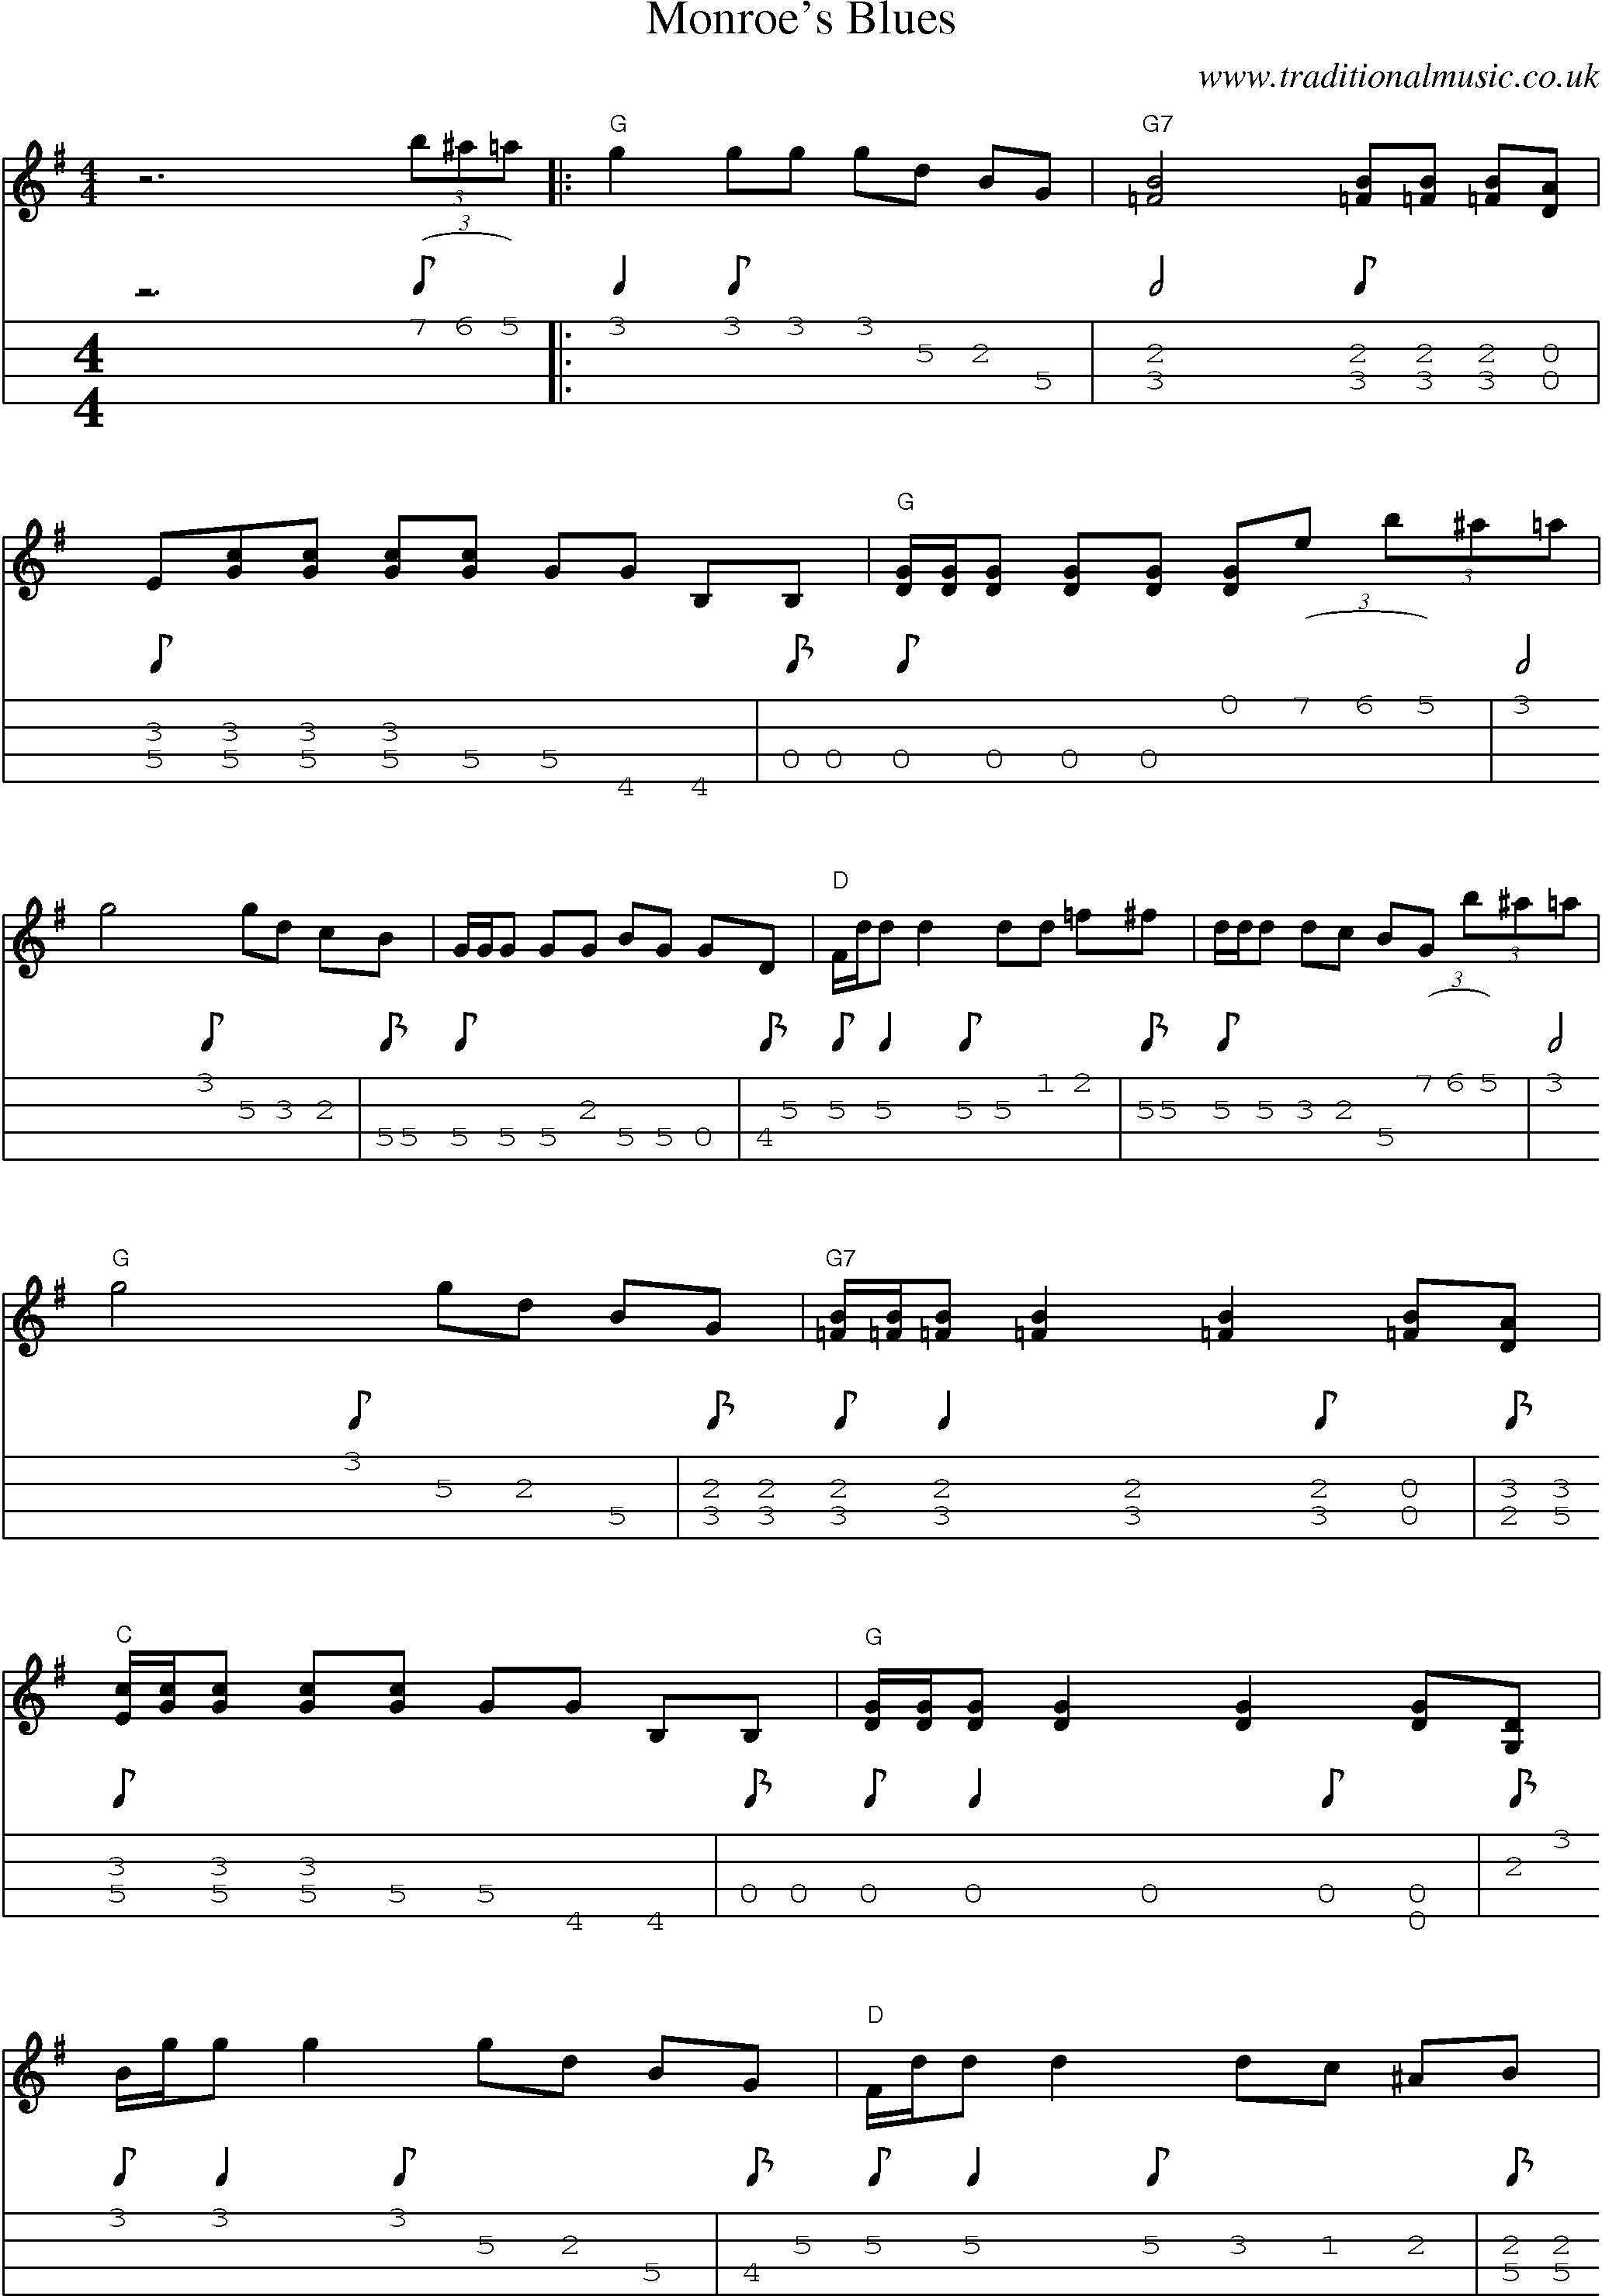 Music Score and Guitar Tabs for Monroes Blues